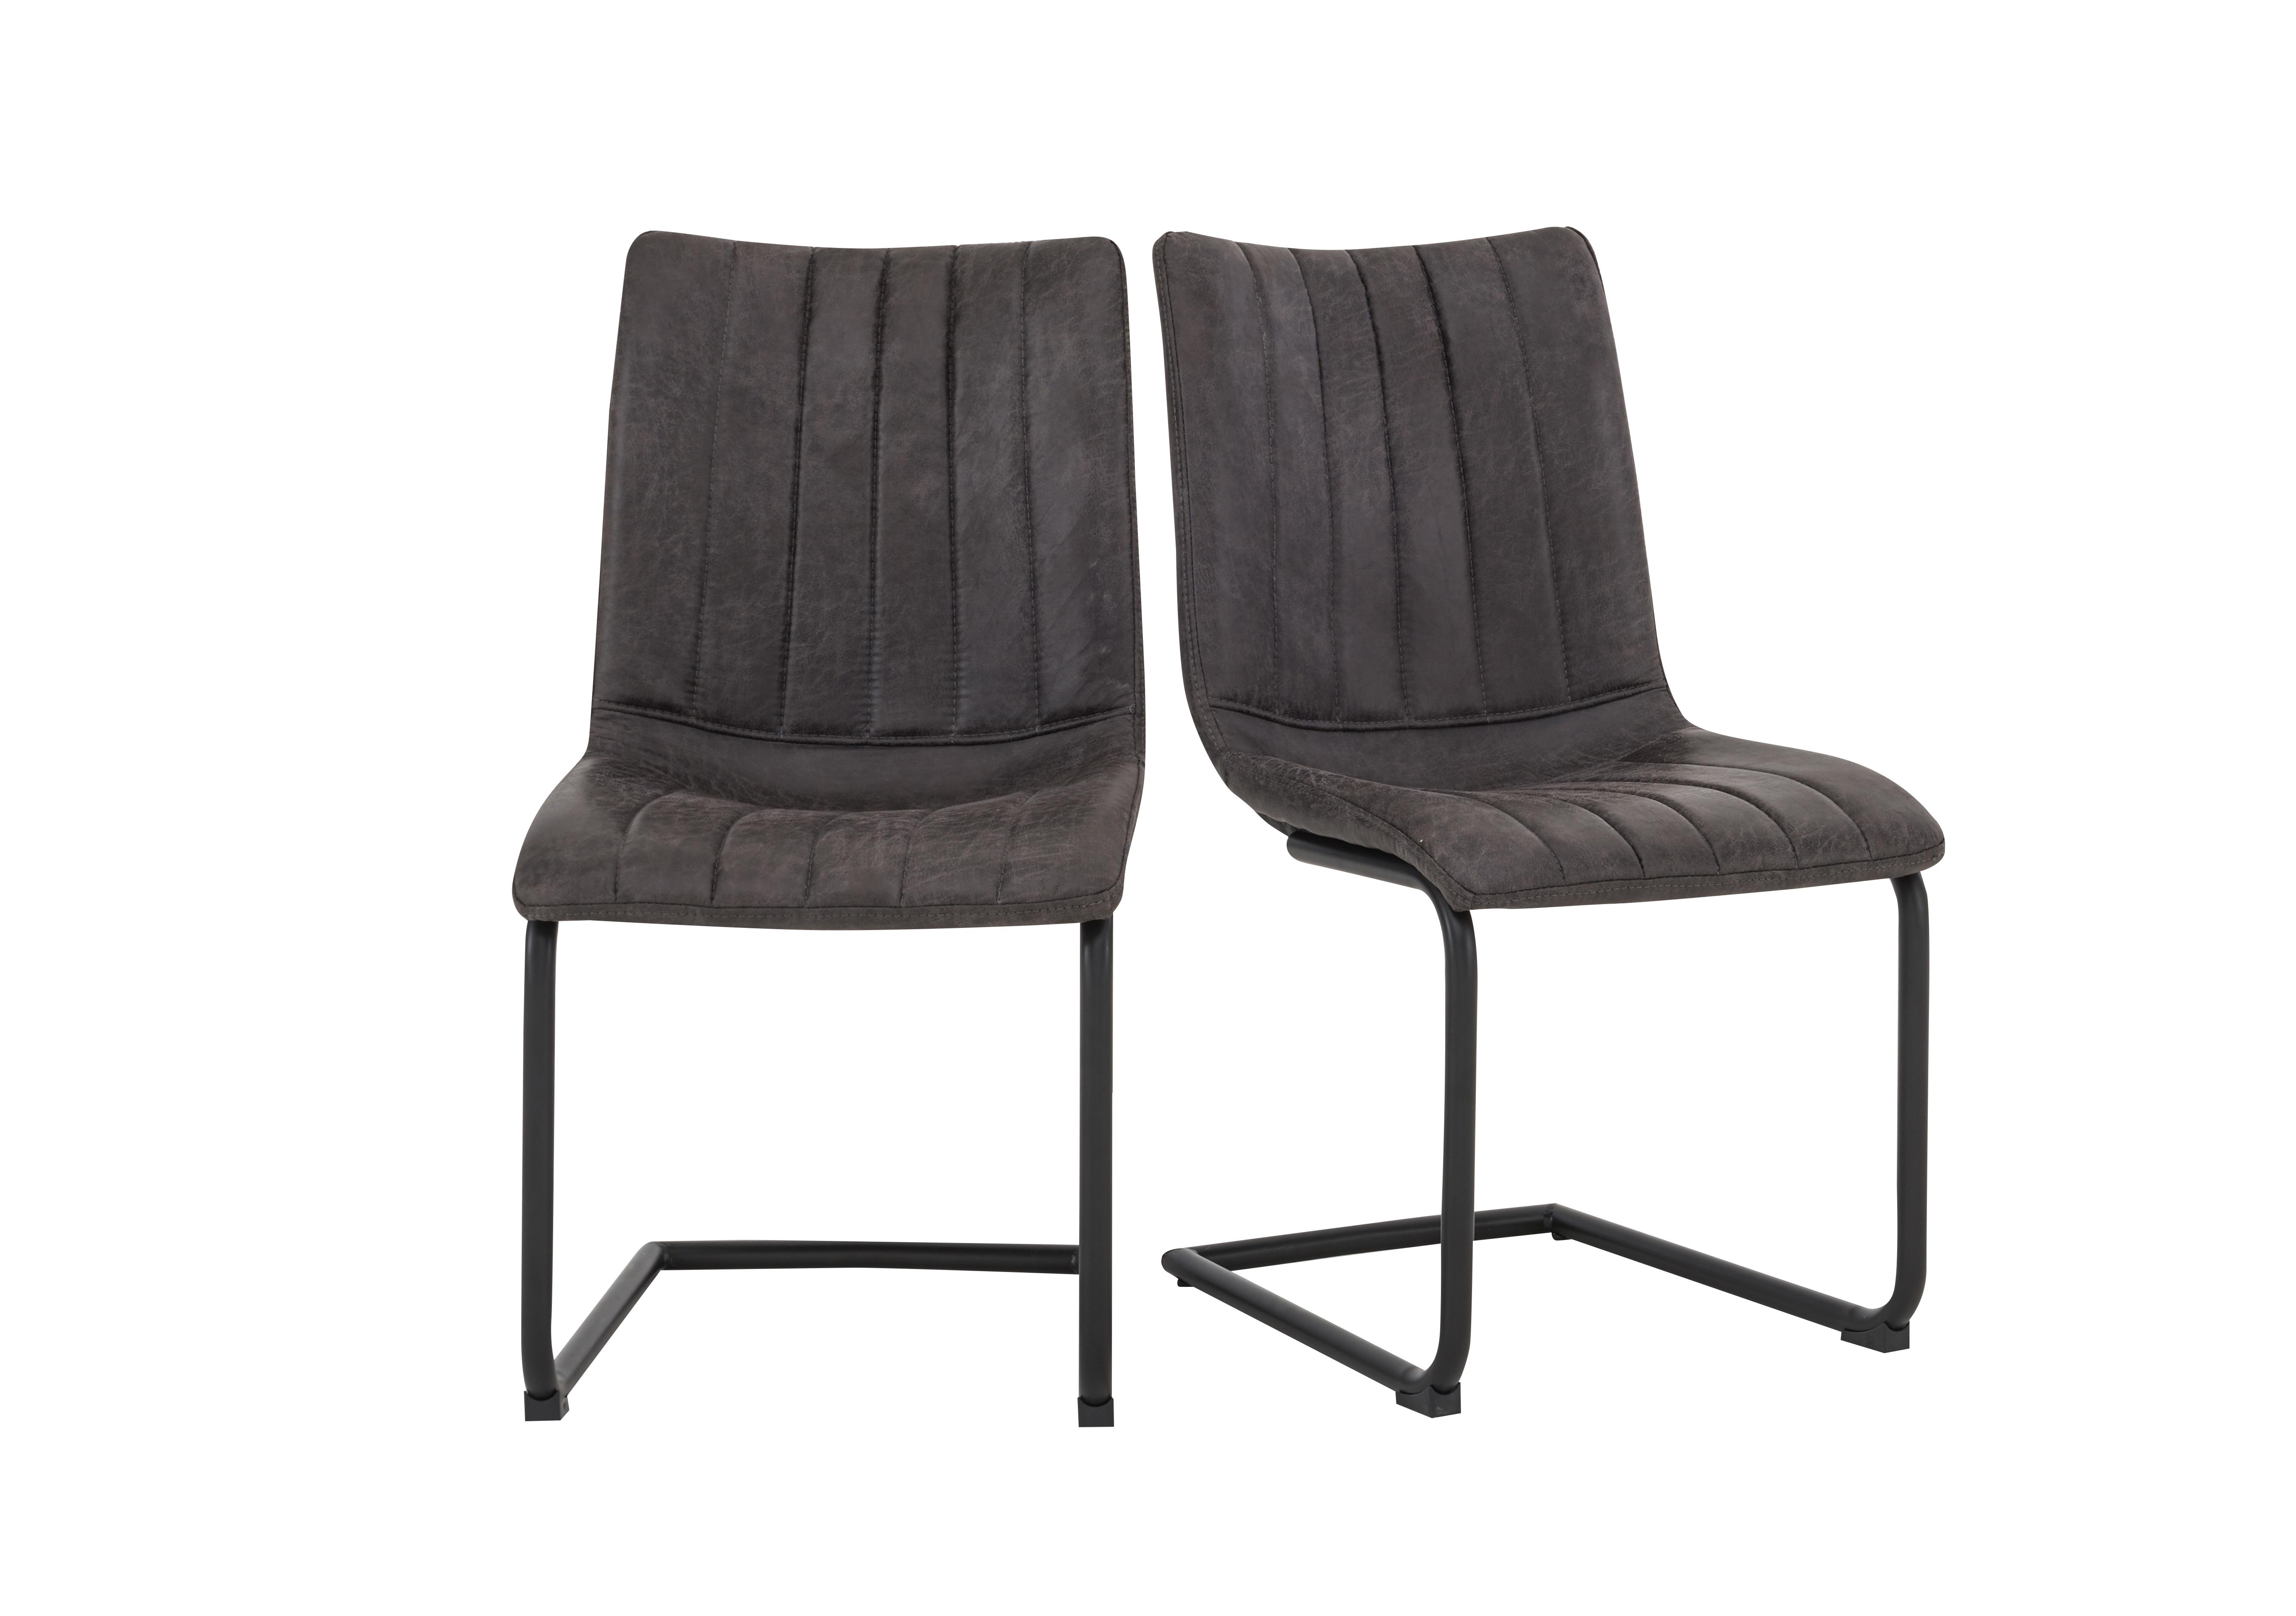 Ranger Pair of Cantilever Dining Chairs in Grey on Furniture Village